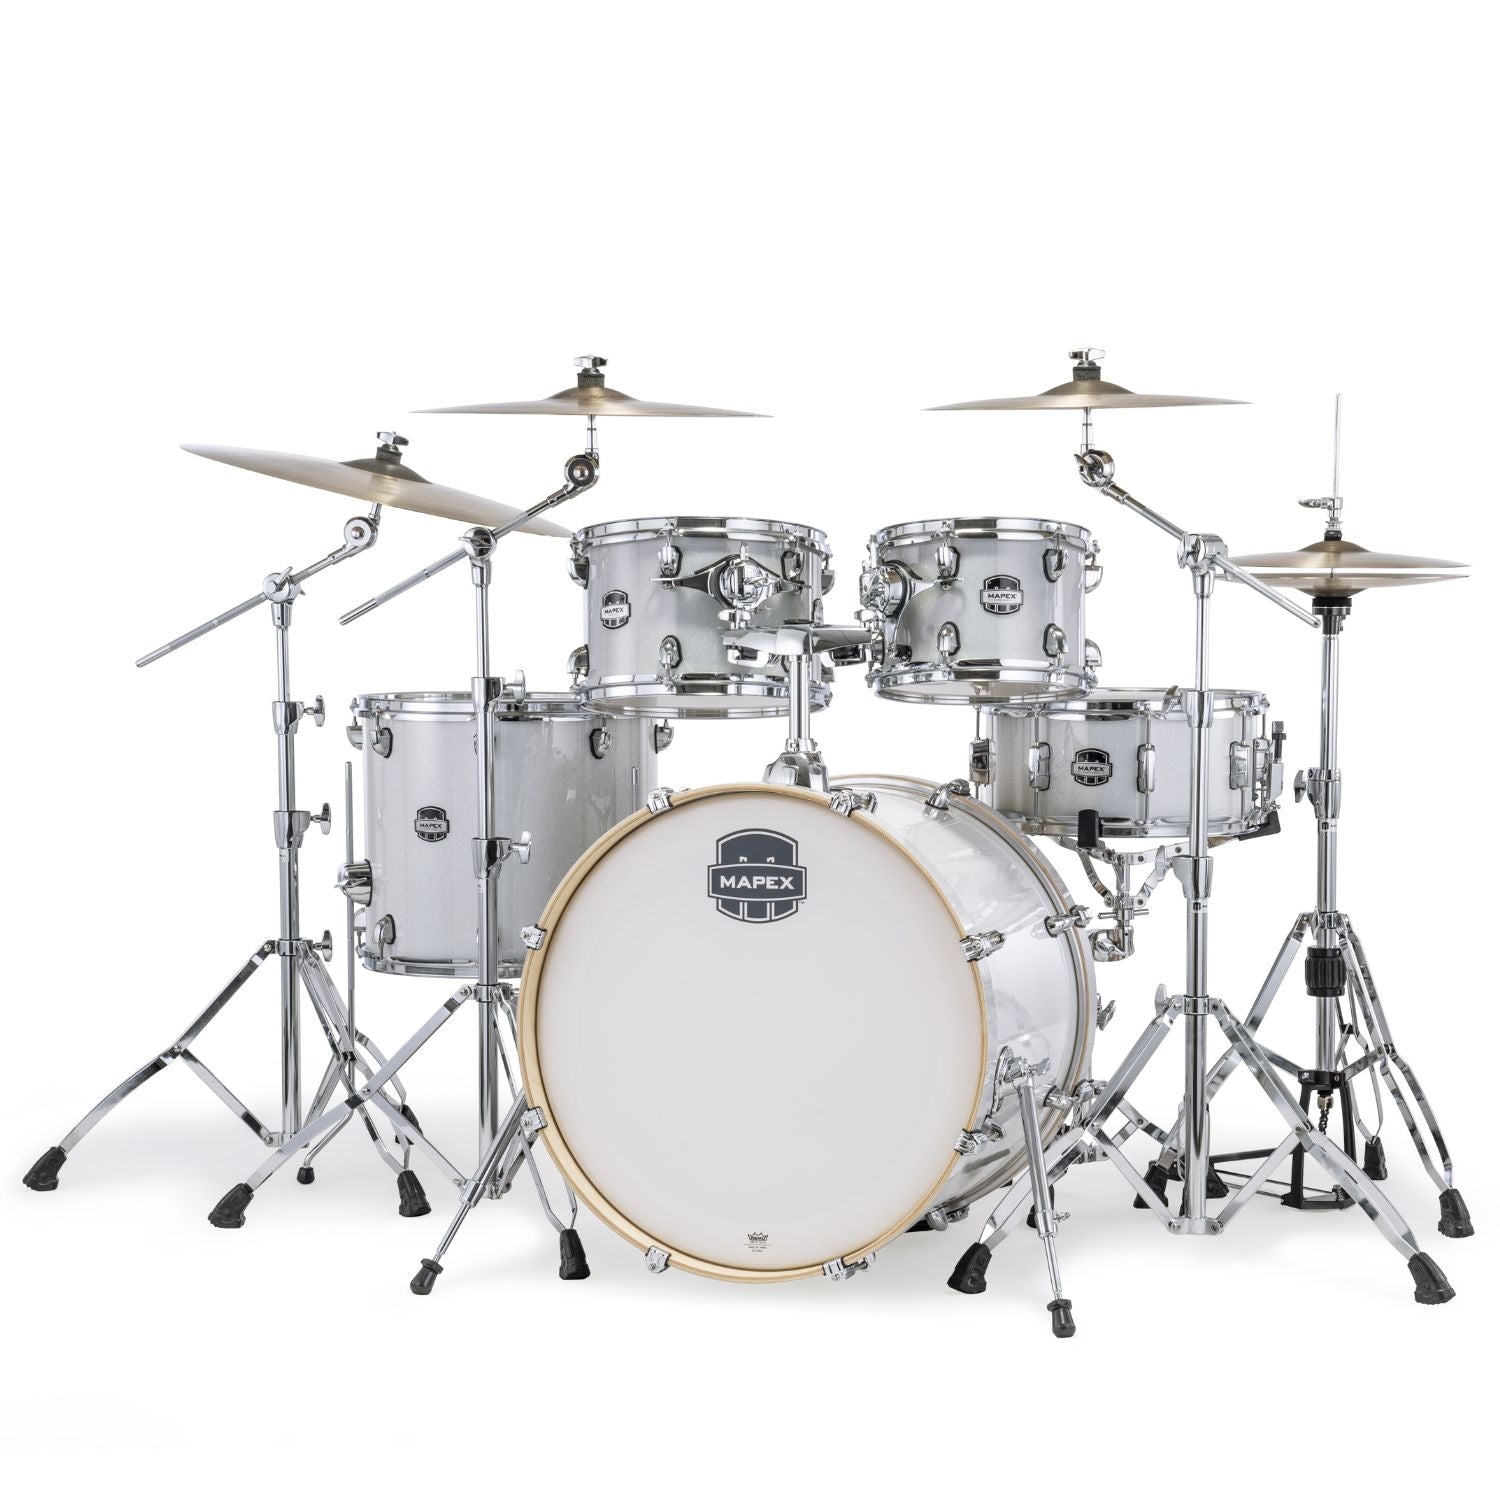 Trống Cơ Mapex Mars Maple MM529SF (22/10 - 12/16/14) + Hardware L4HPACK 400 Series + Cymbal PAISTE PST3 - Việt Music